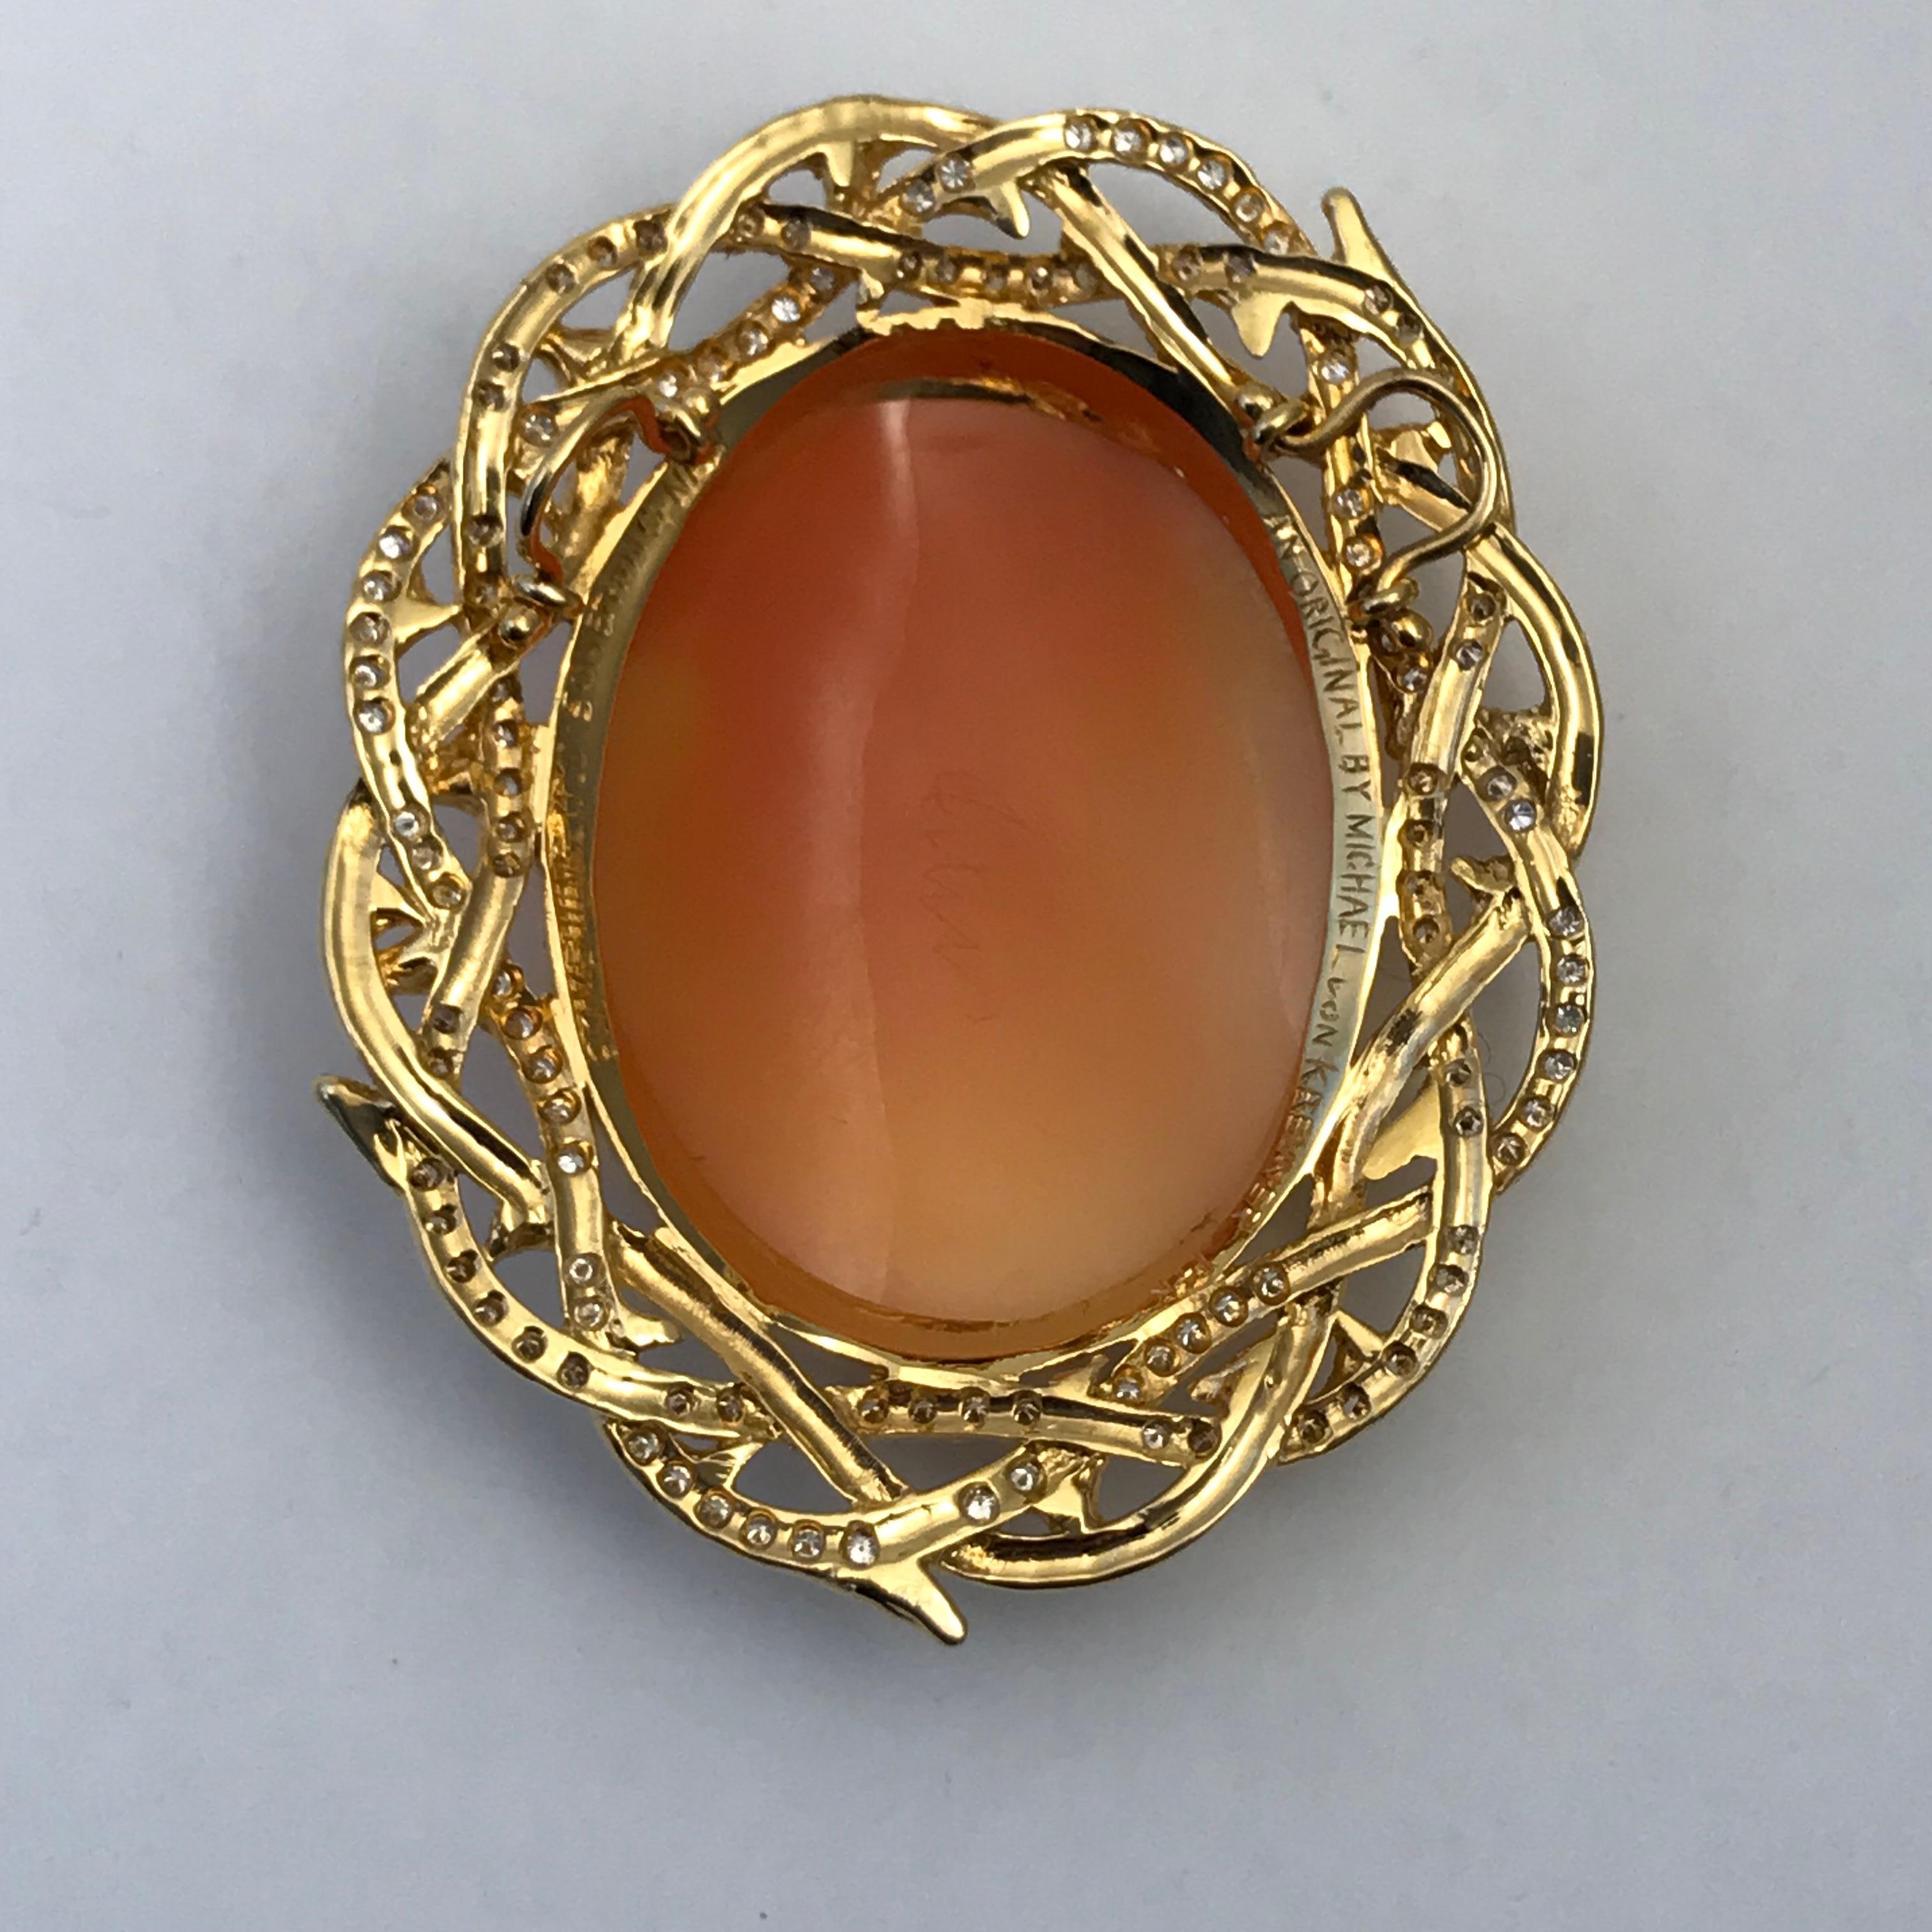 Cameo 1890s Jesus Set in 14 Karat Gold with Diamonds, Rubies and Brown Diamonds For Sale 5